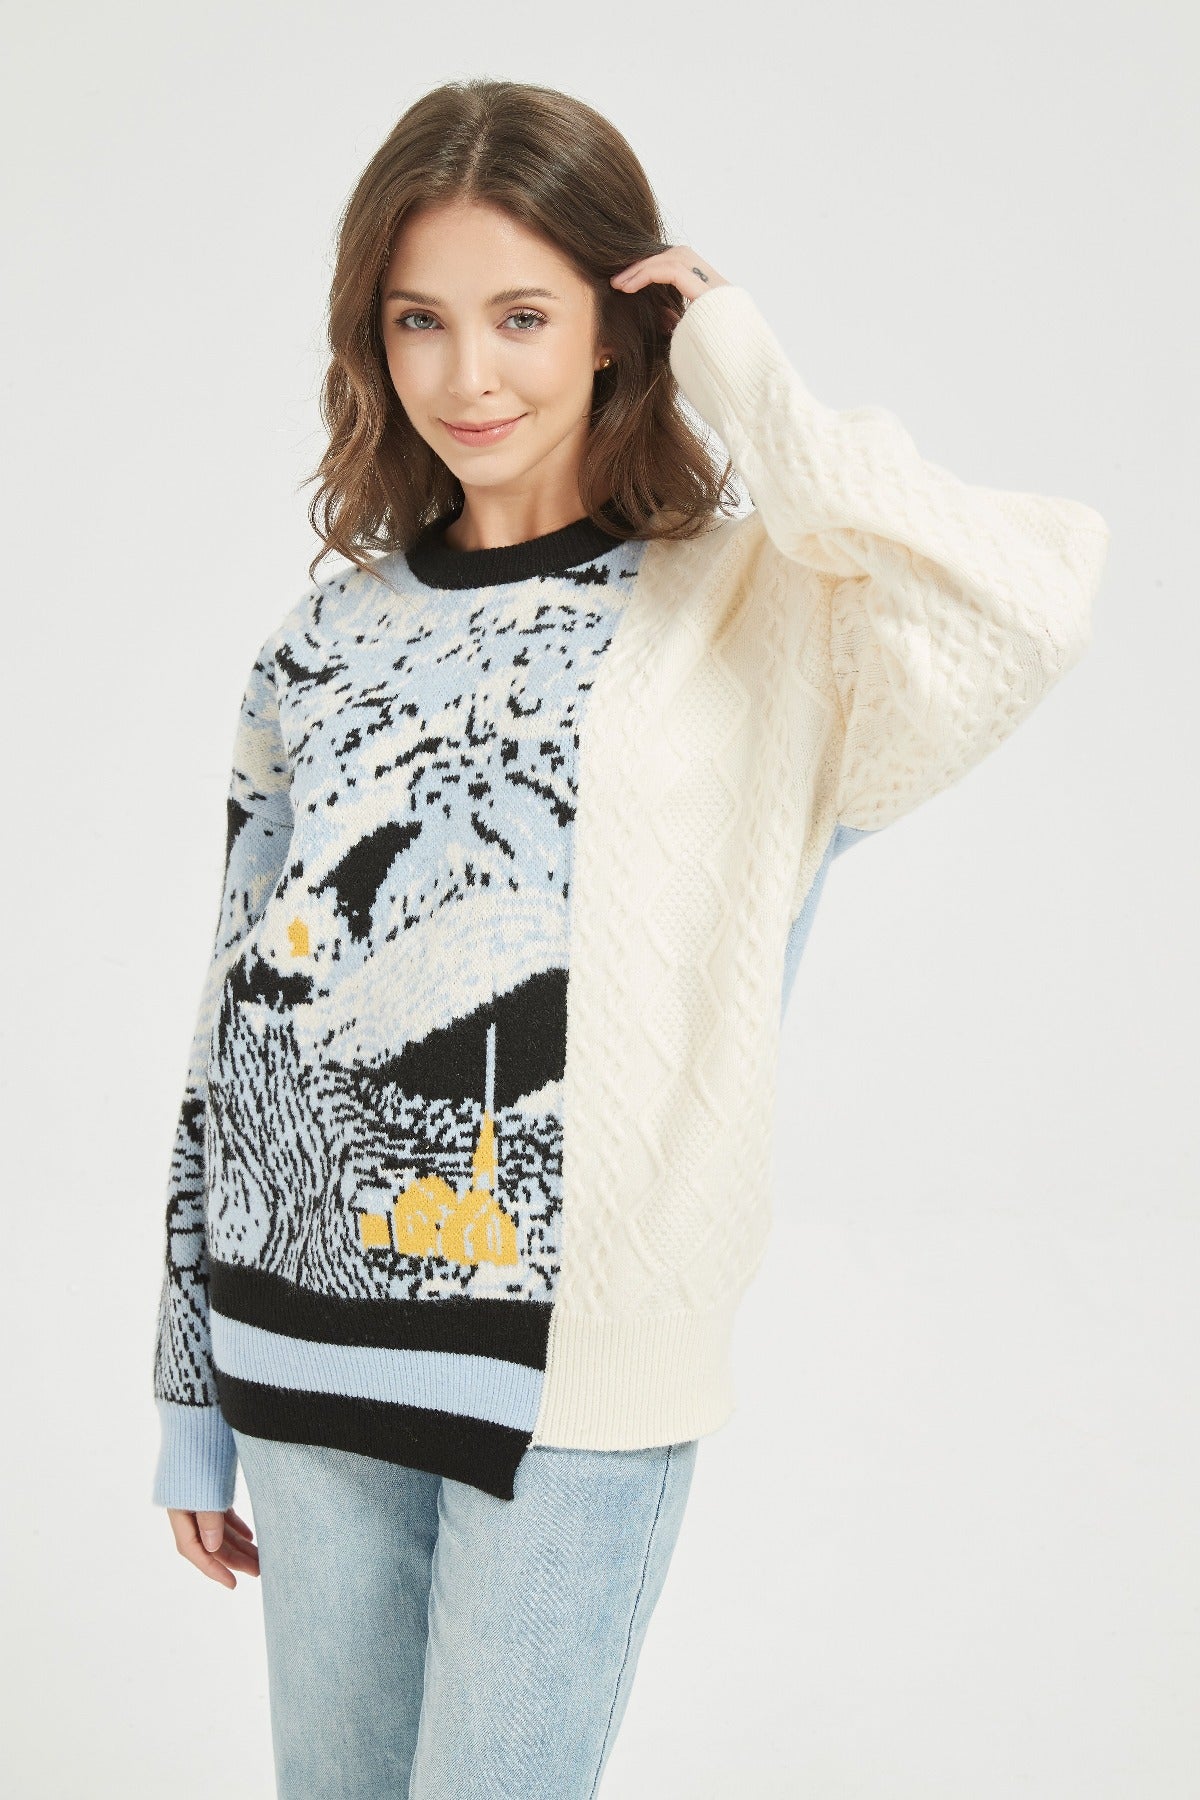 Half Knitted Starry Night sweater